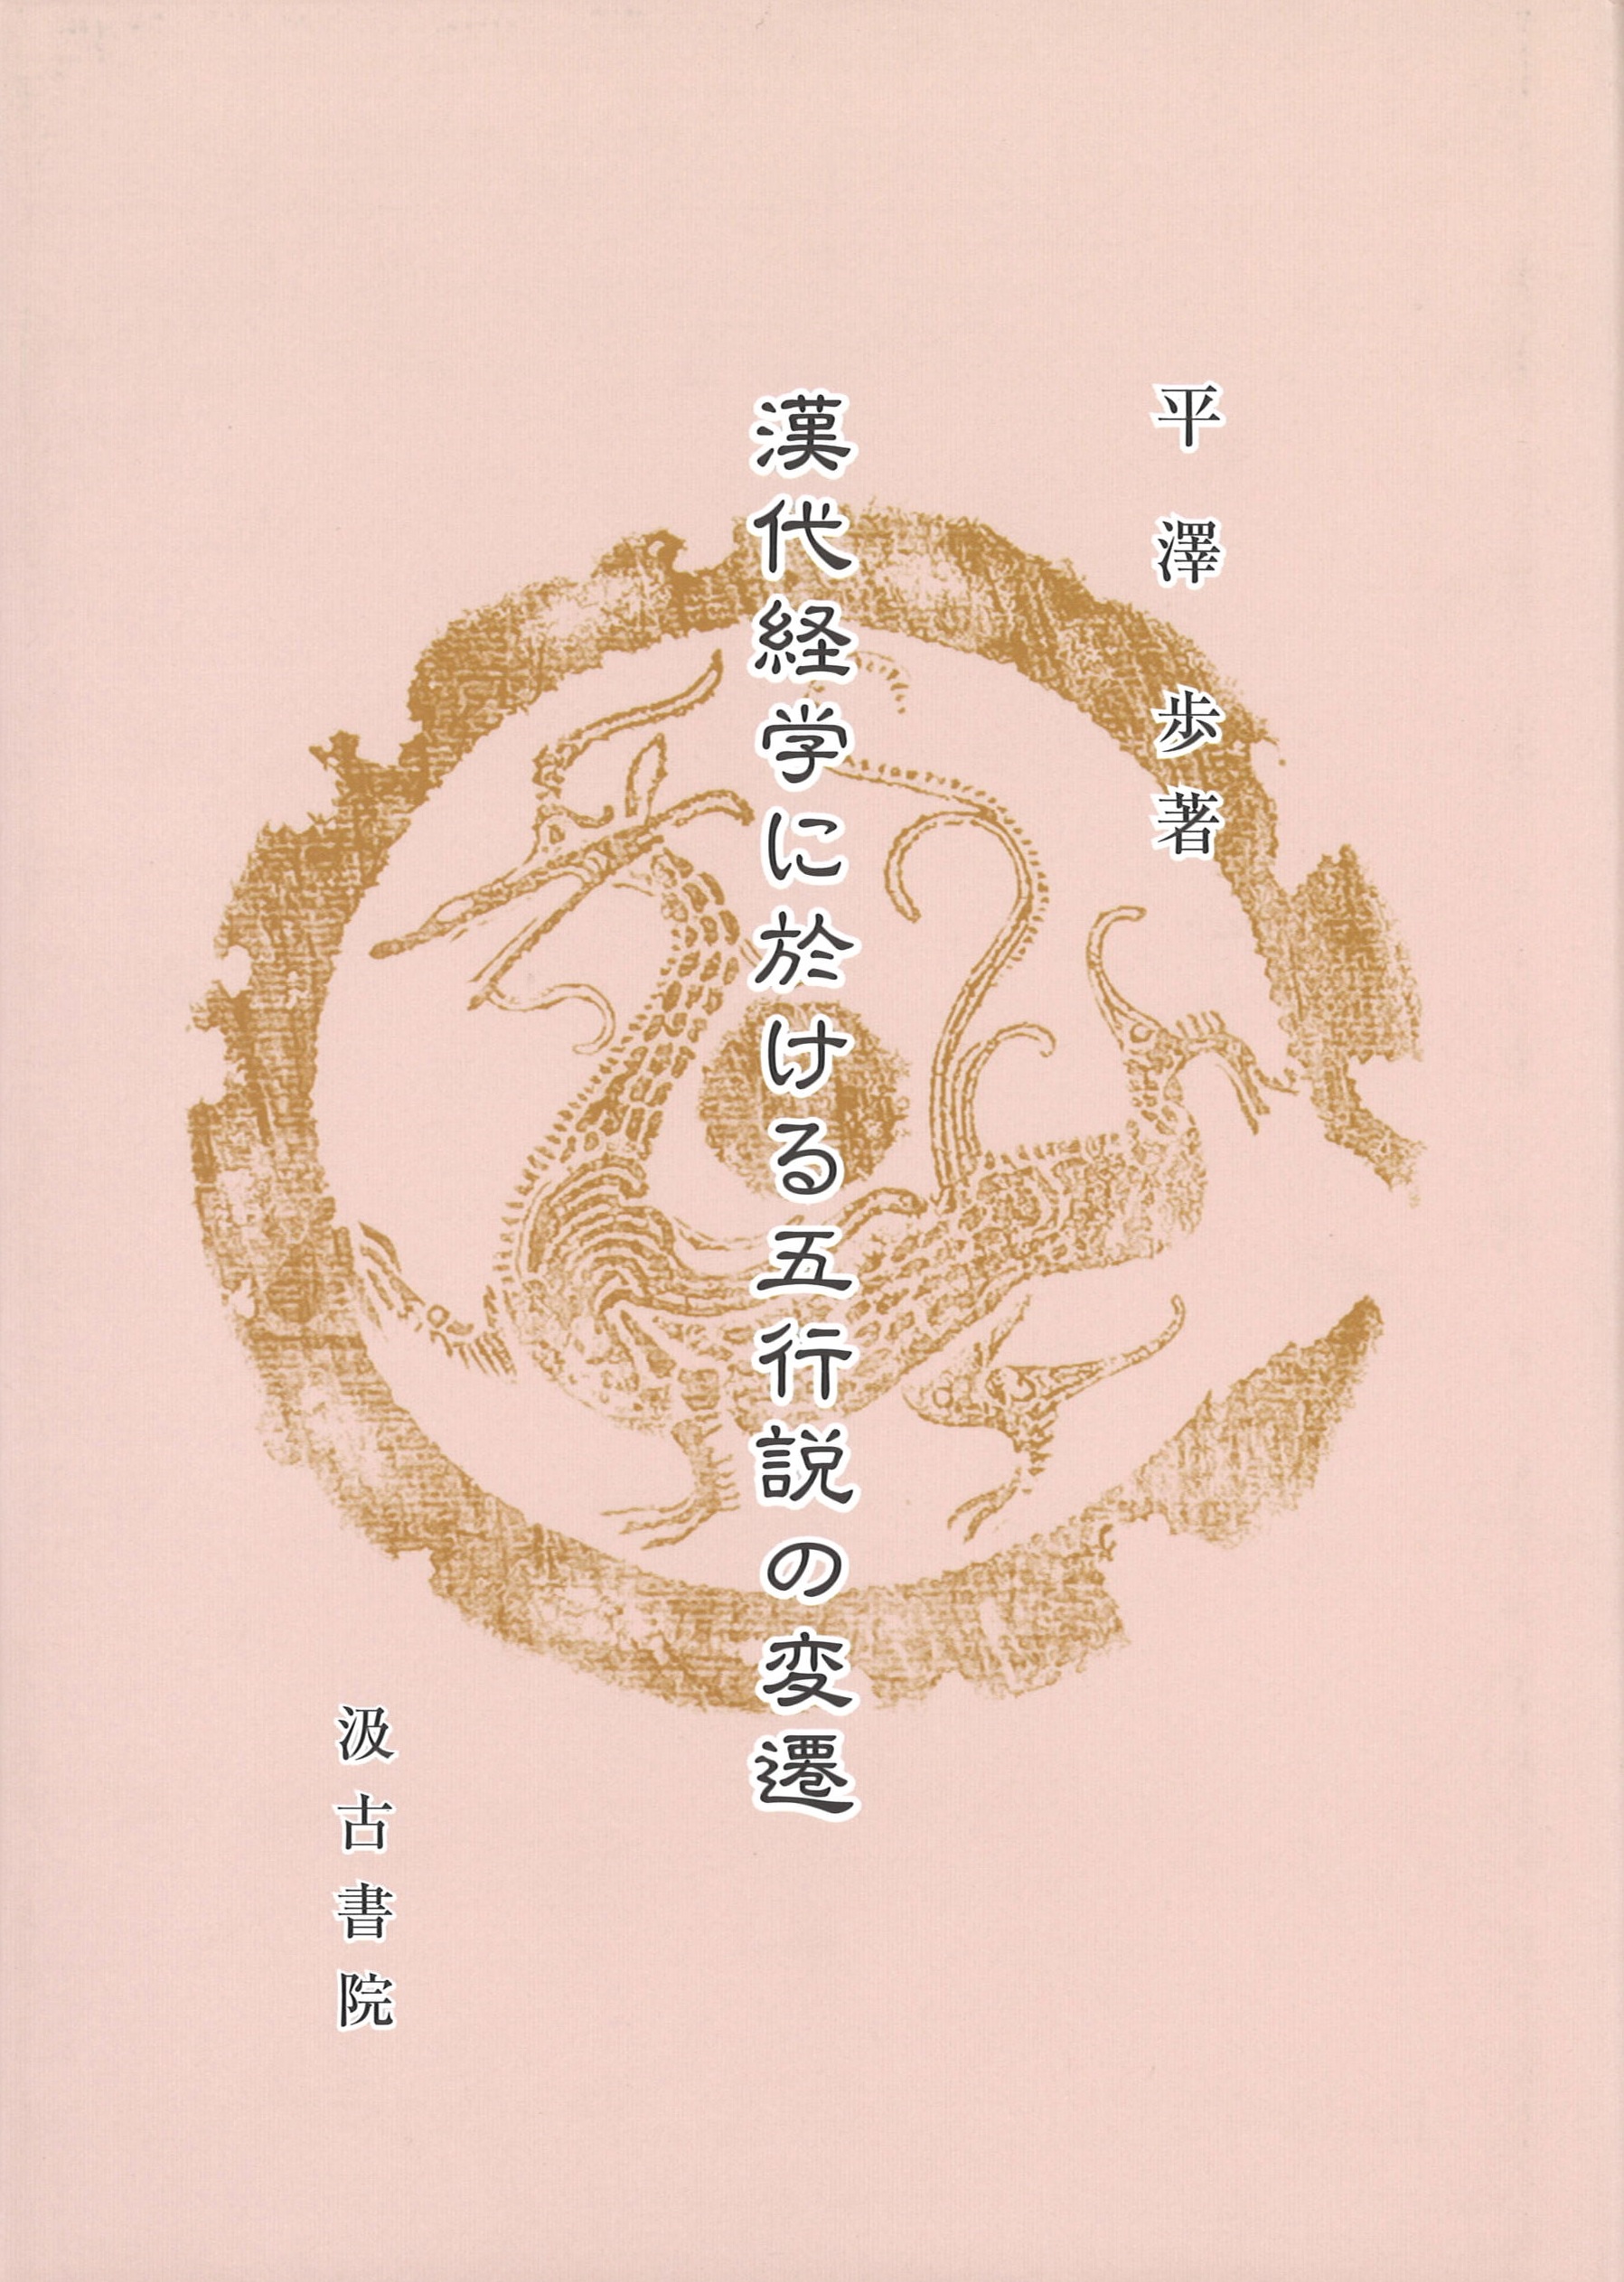 A pale pink cover with an abstract illustration of a dragon